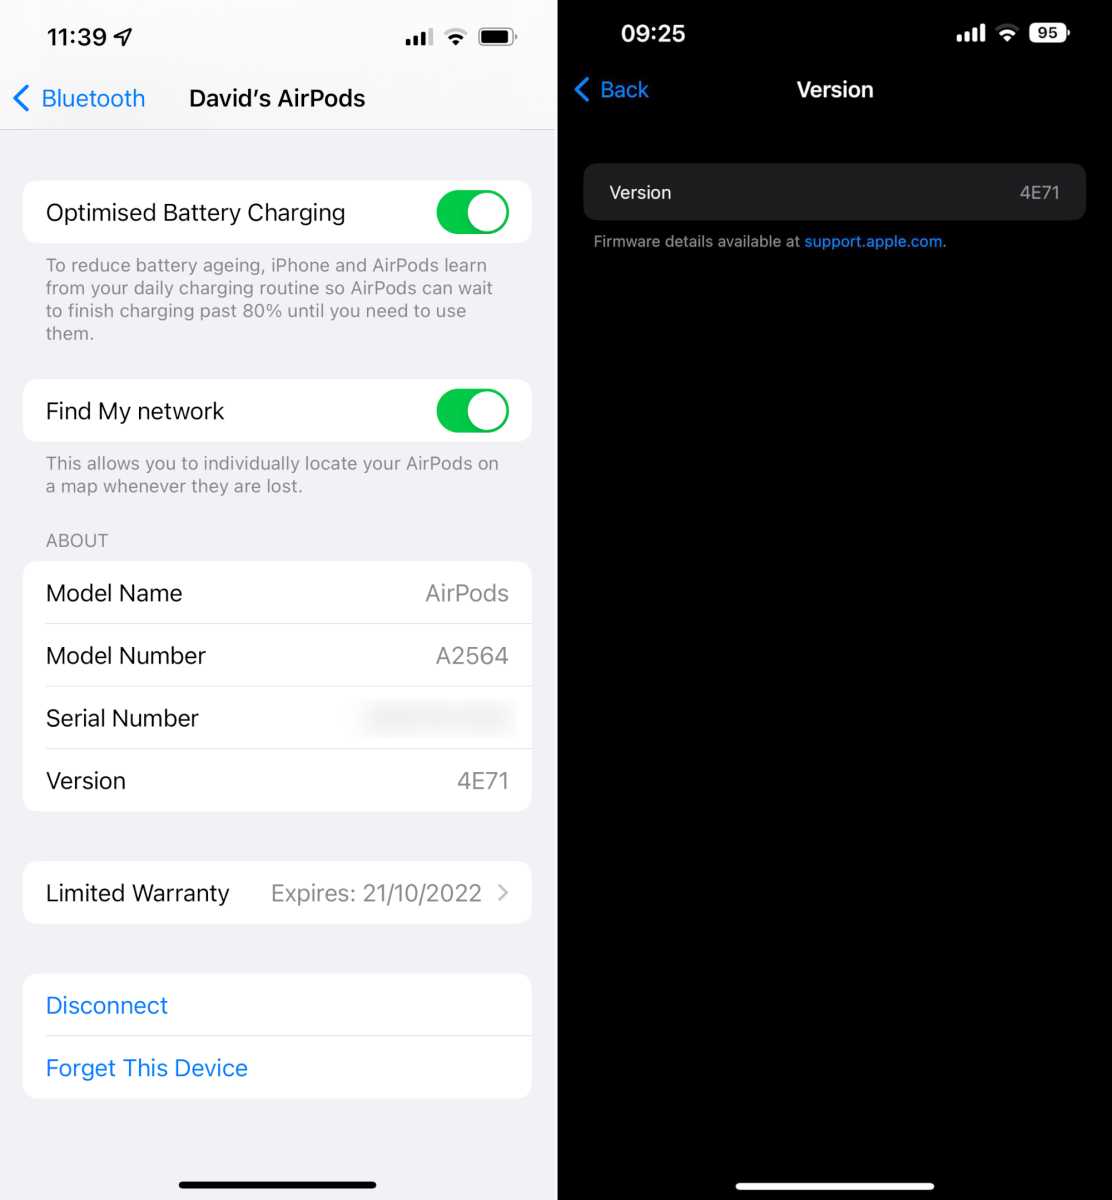 AirPods firmware settings in iOS 15 and iOS 16 beta 5